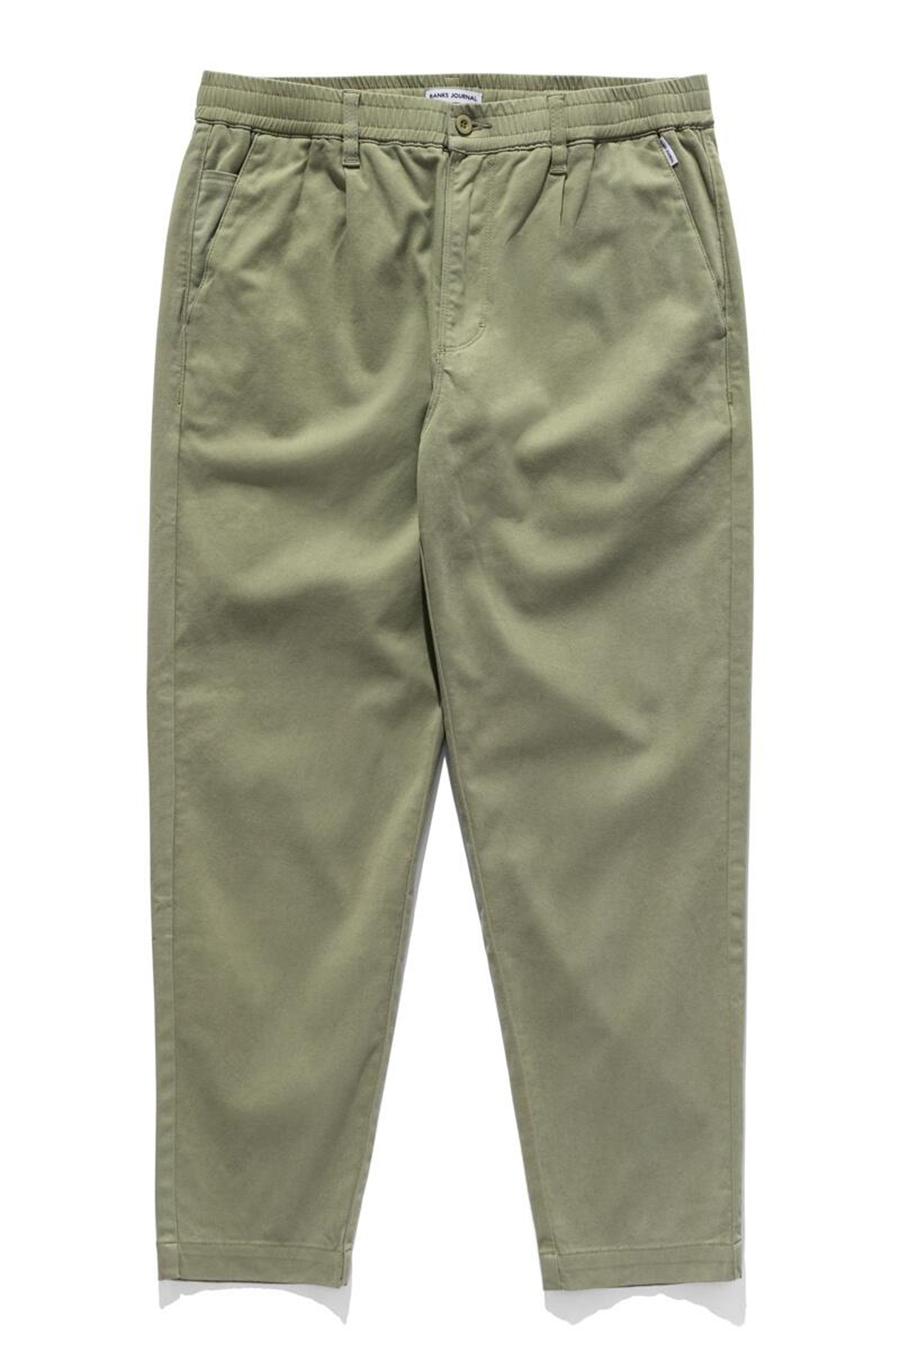 Supply Pant | Green Tea - Main Image Number 1 of 2